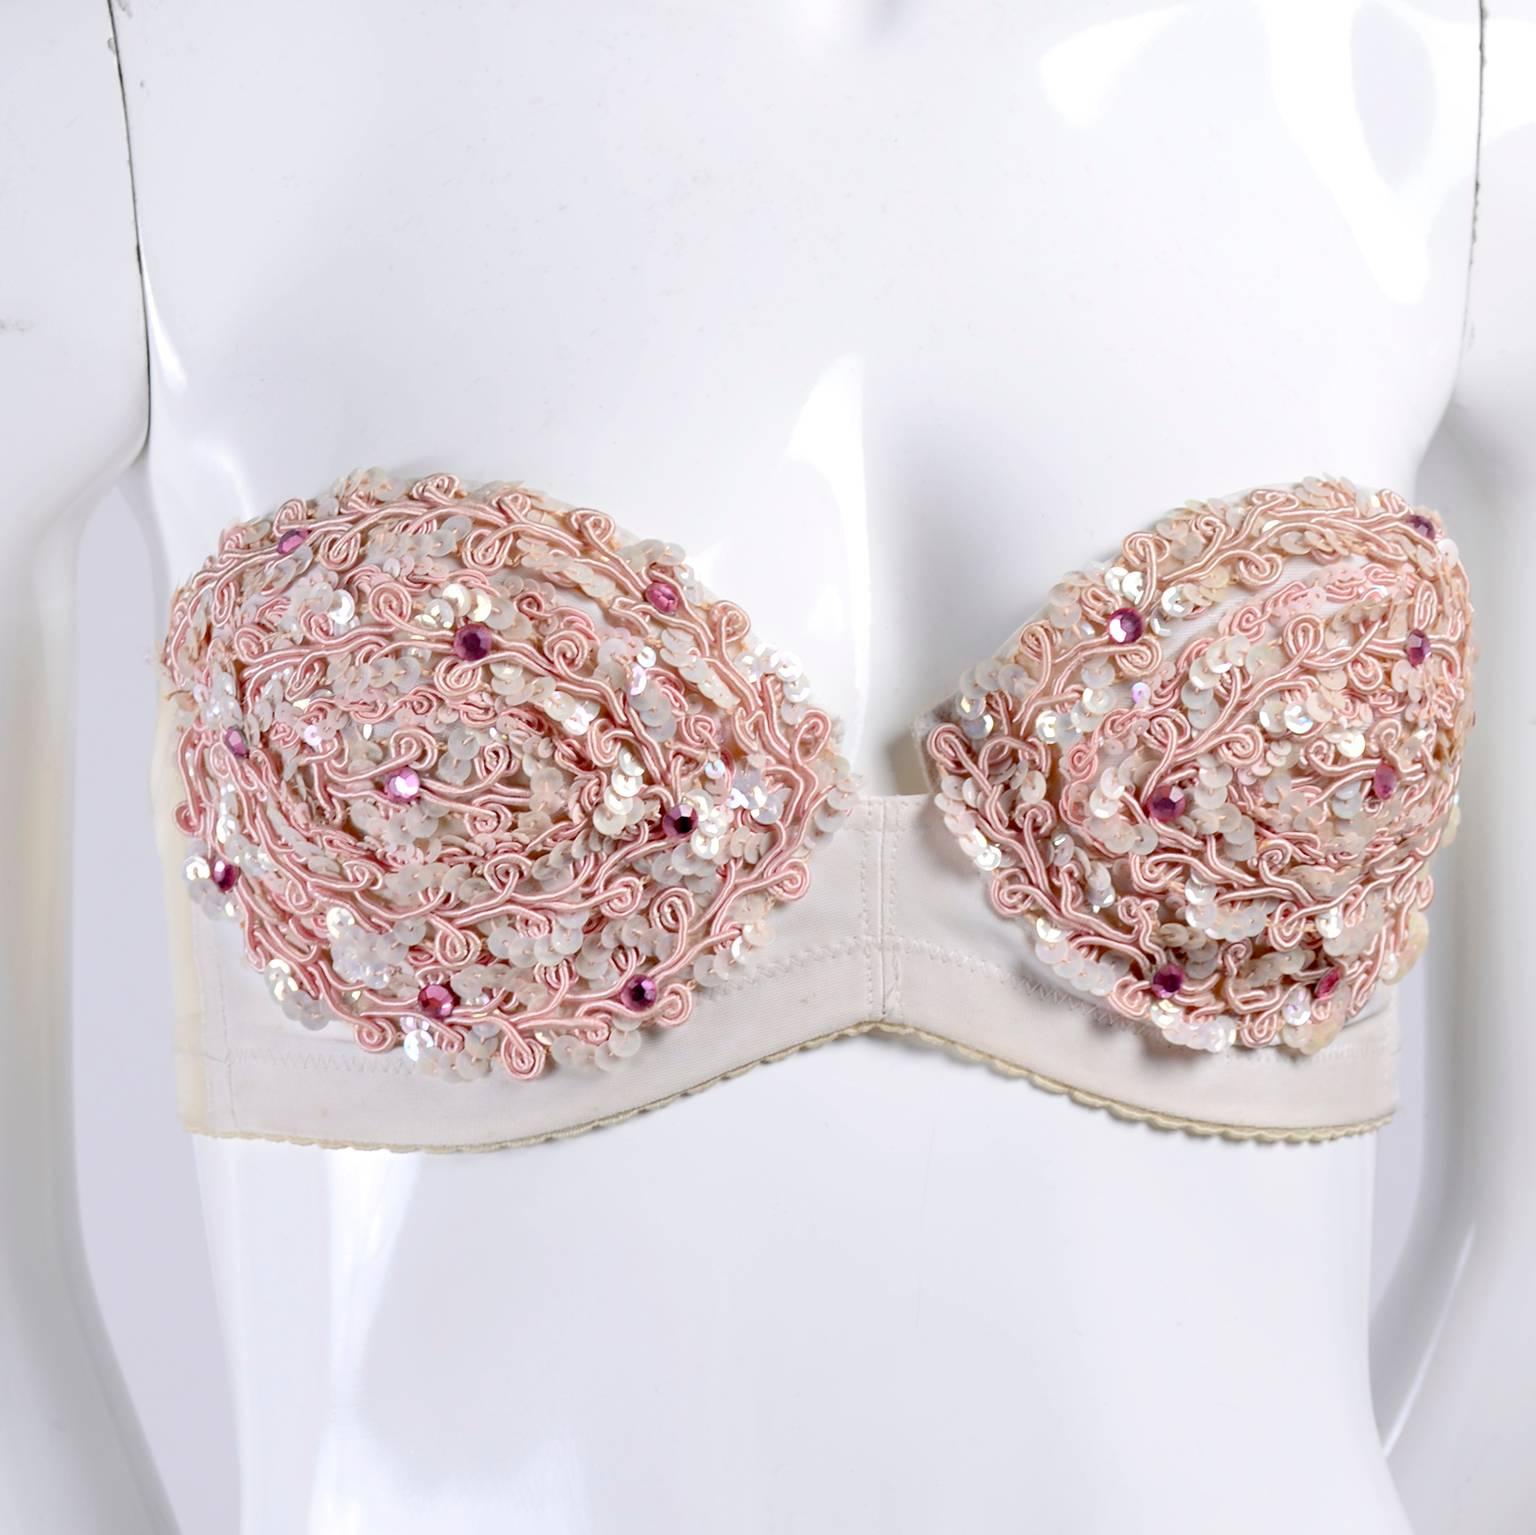 Beige Cher Owned Pink Strapless Sequin Bra With Cher's Autograph inside Of Cup